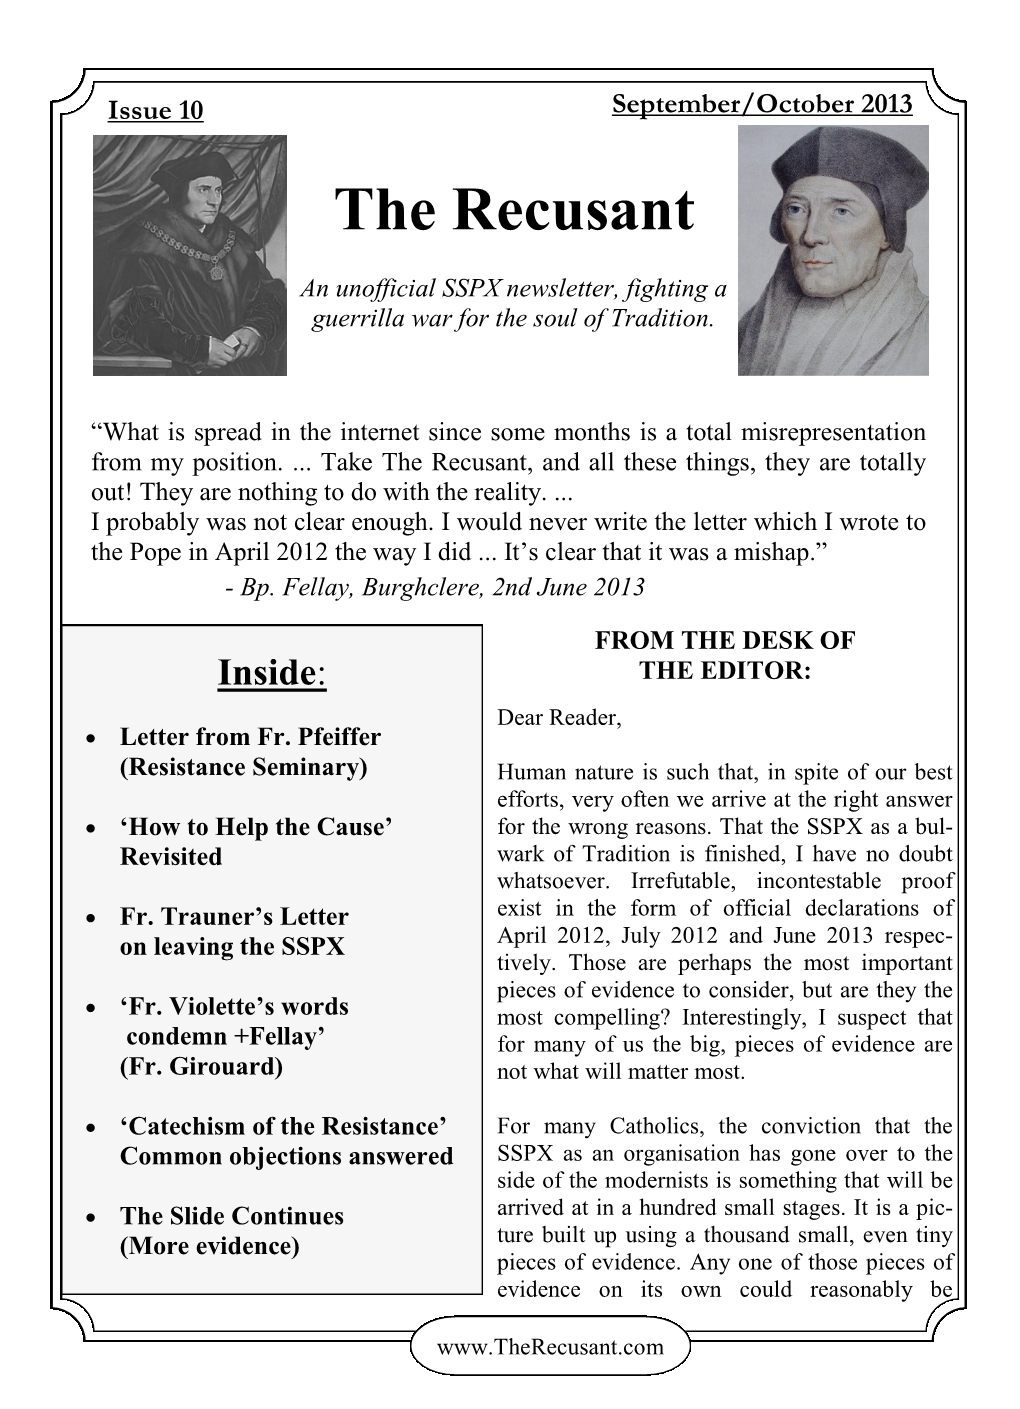 The Recusant